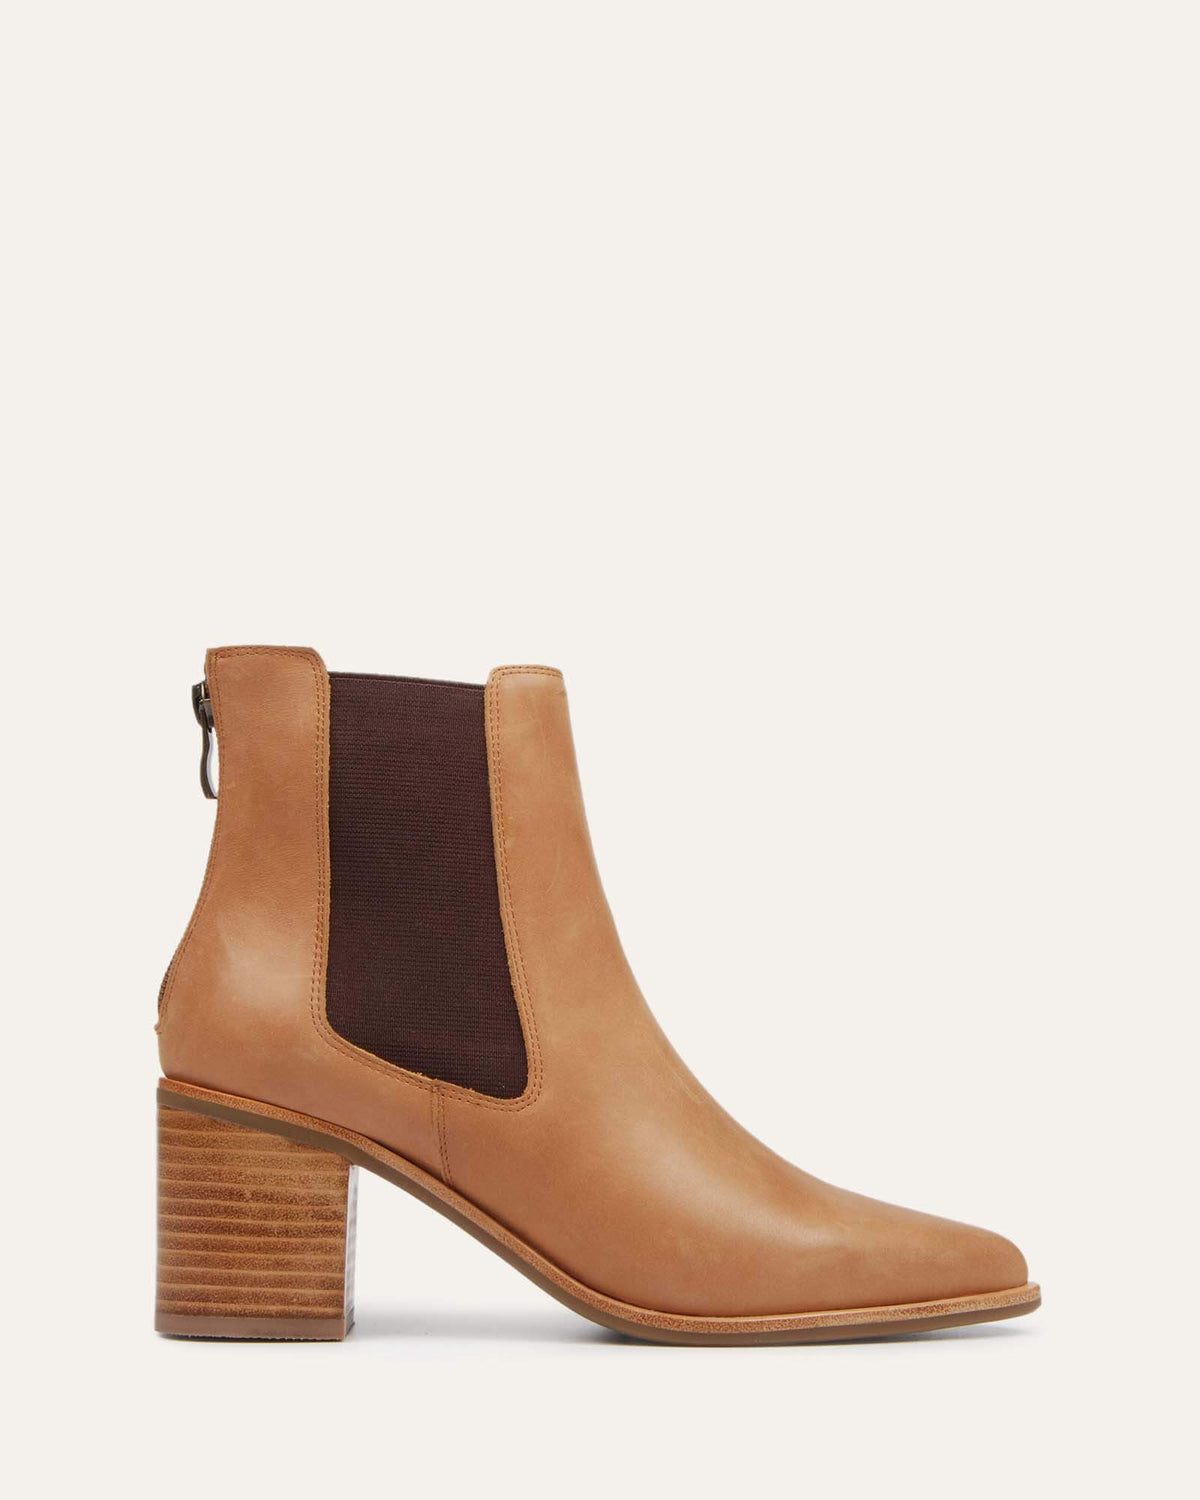 ALLURE MID ANKLE BOOTS CHOCOLATE LEATHER